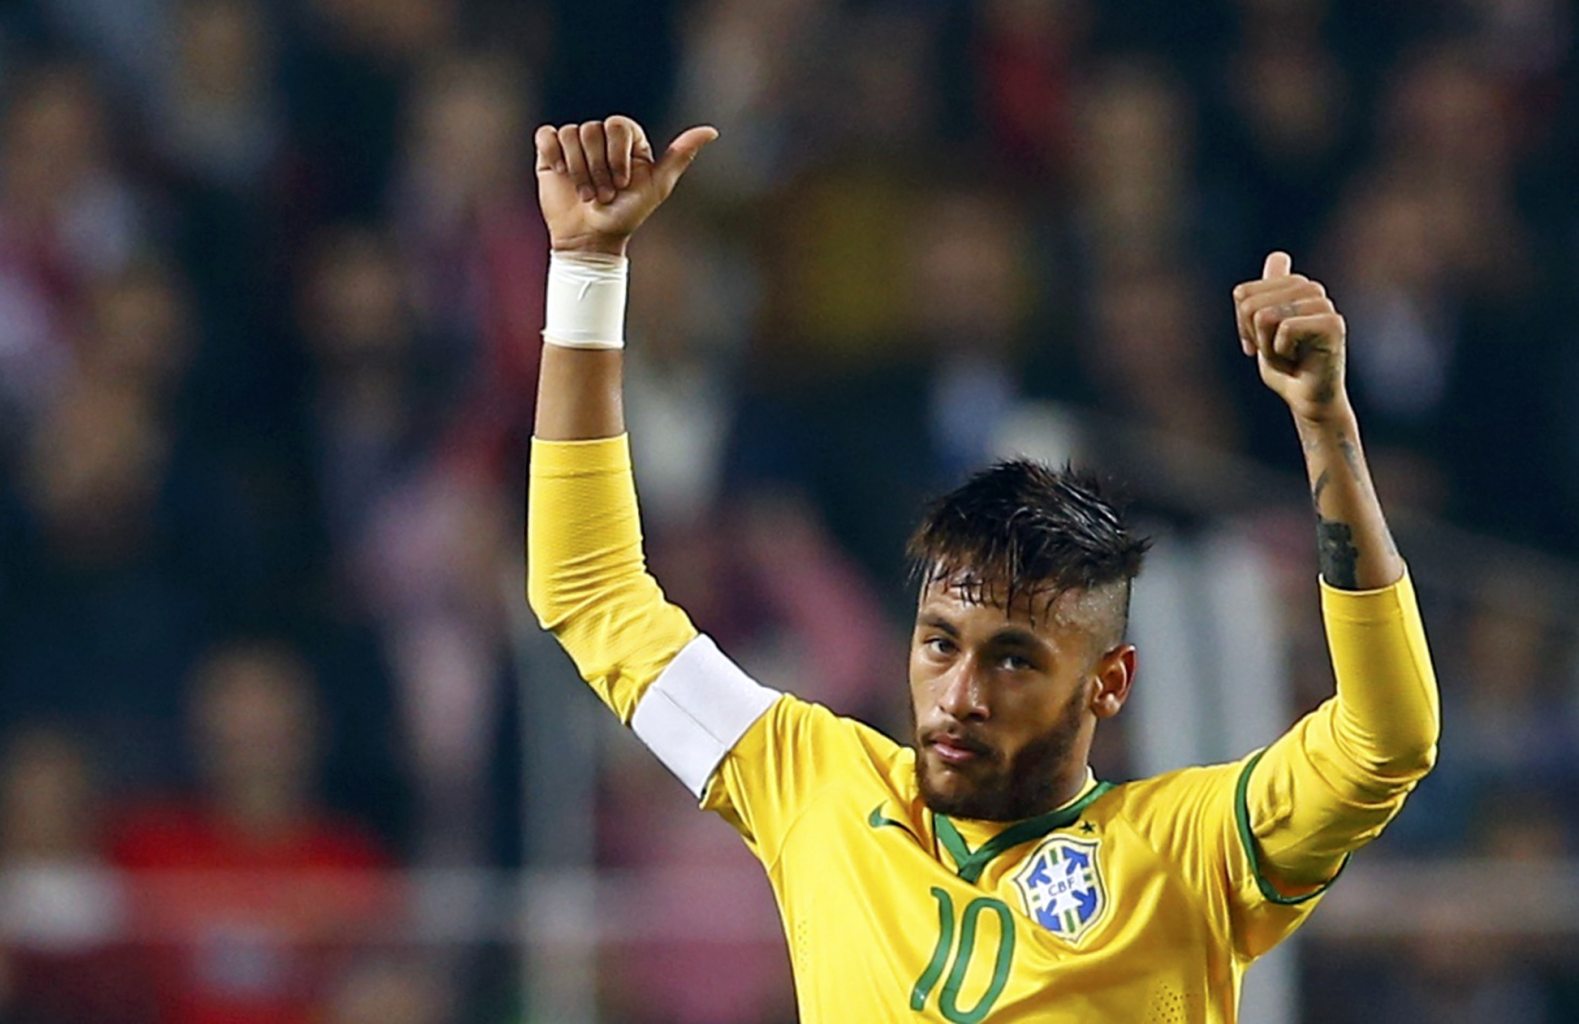 Neymar putting his two thumbs up in a Brazil game